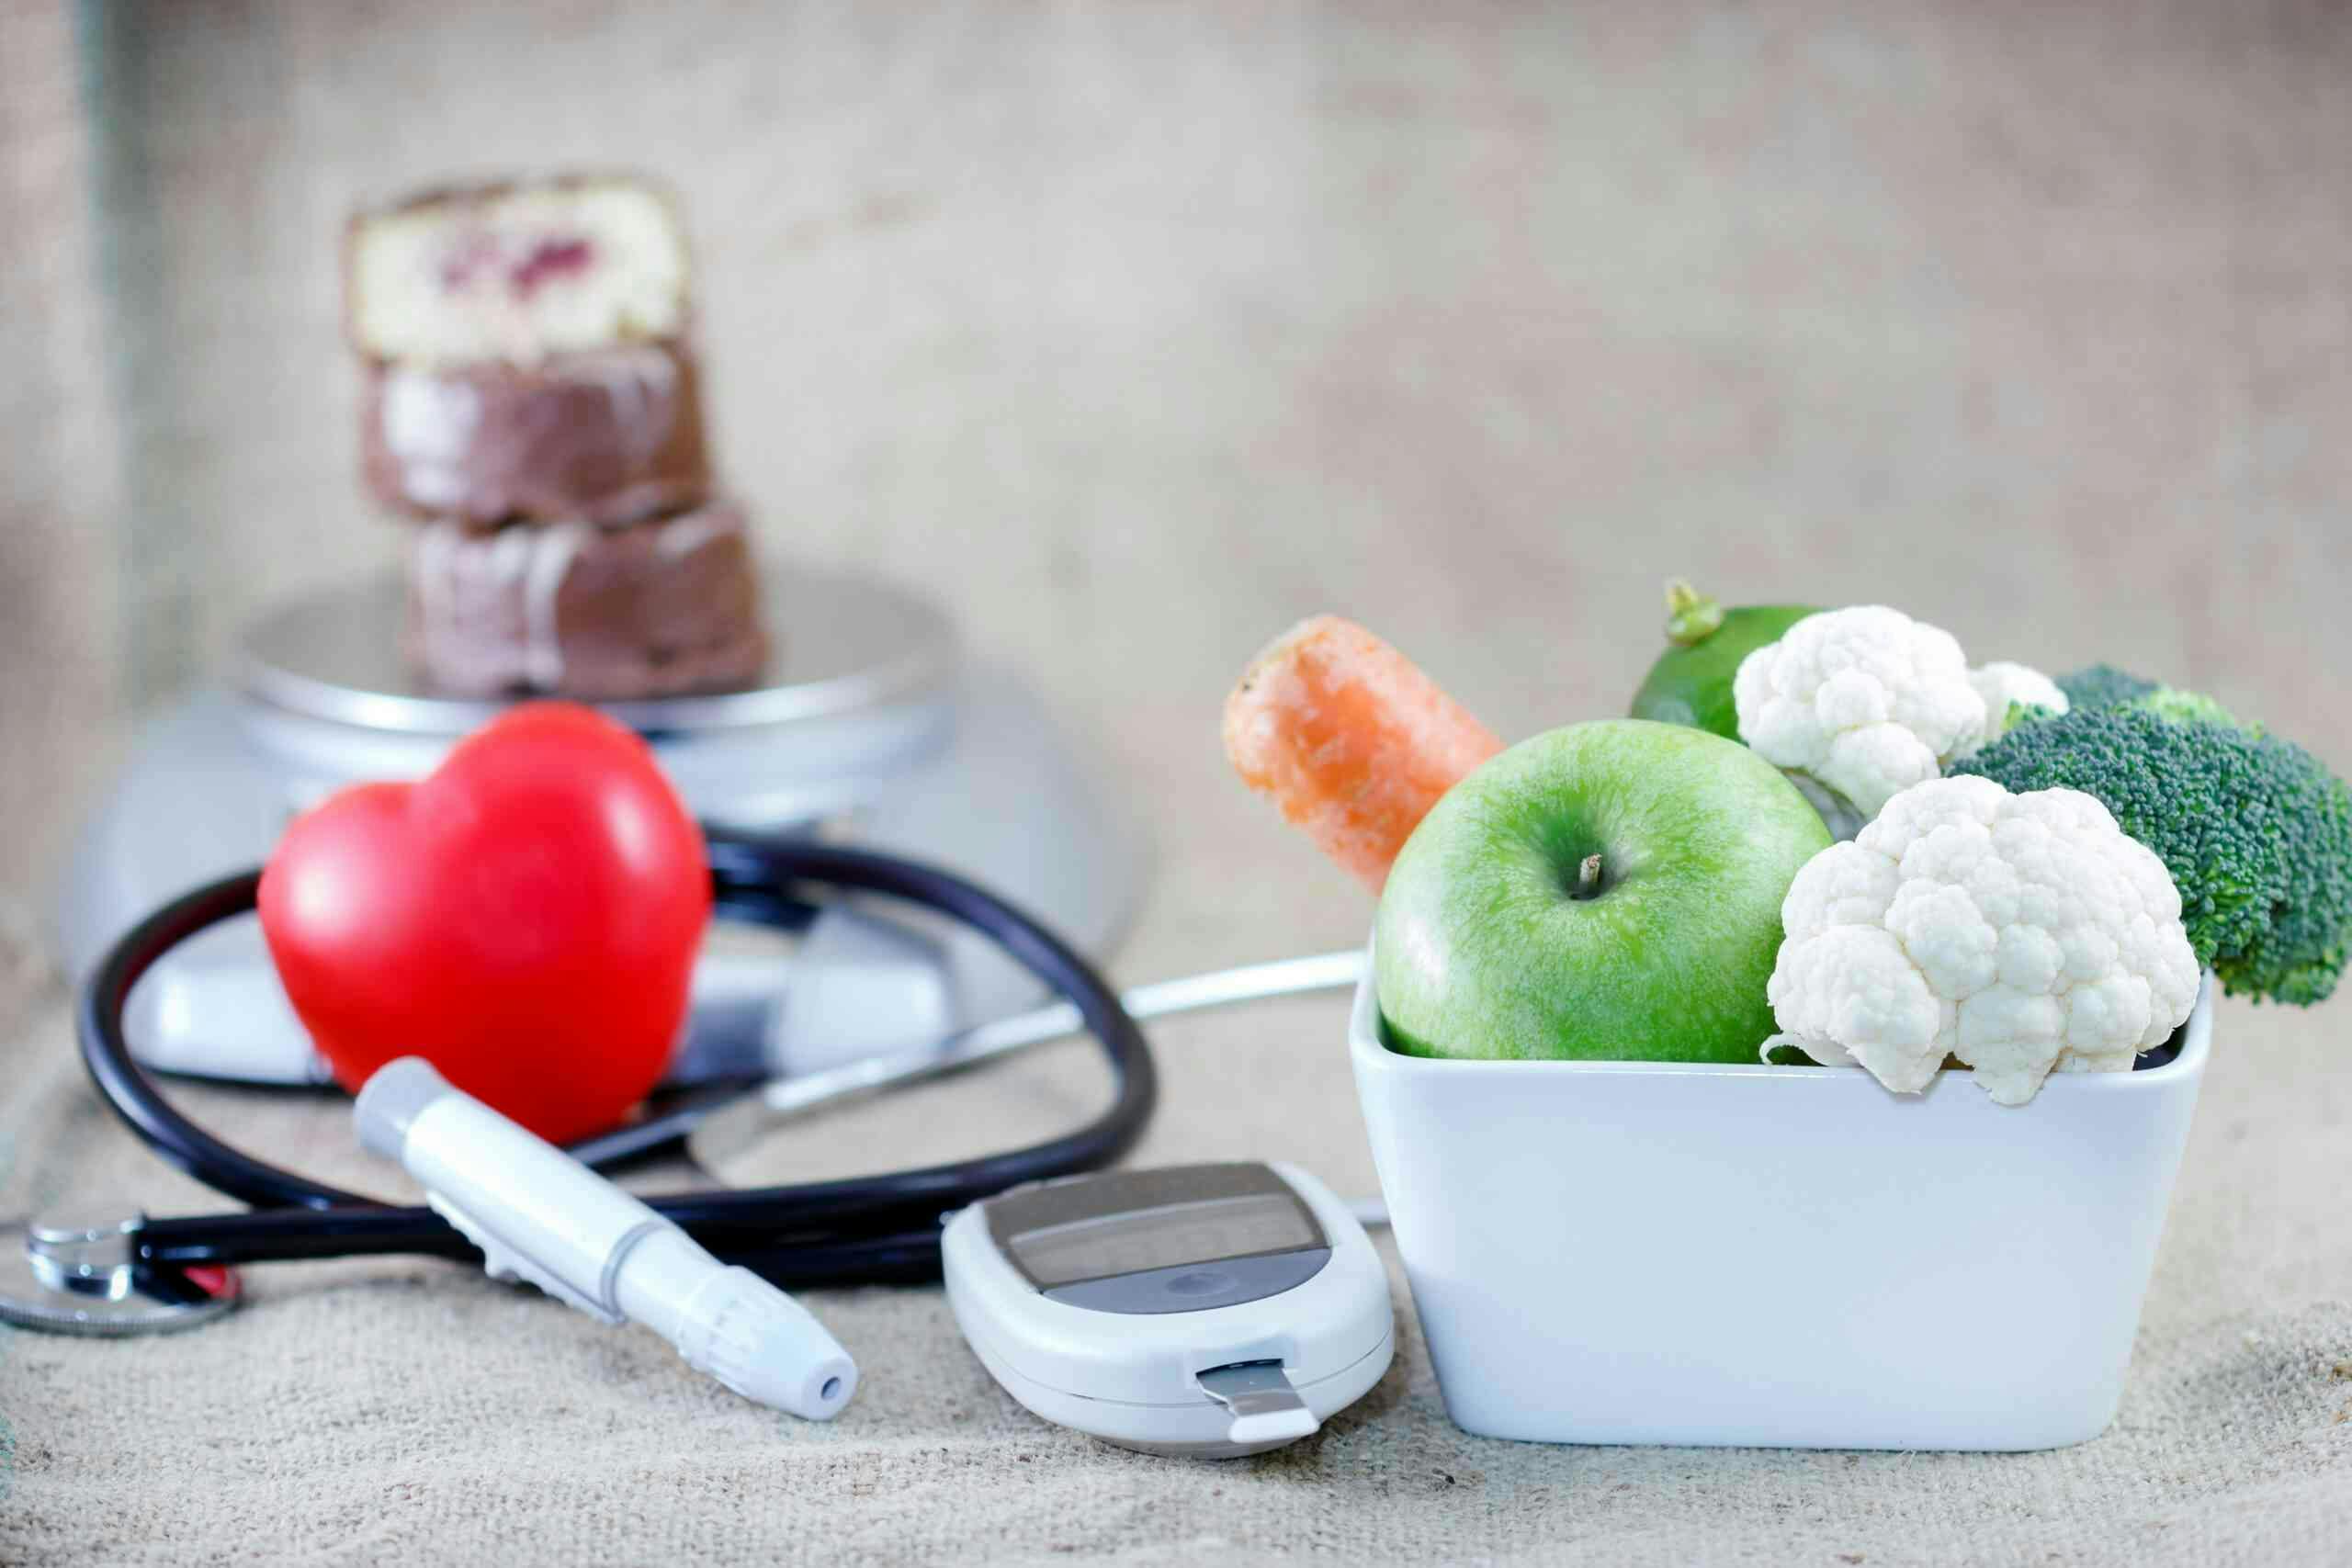 <p>Proper and balanced diet to avoid diabetes &#8211; the choice is up to you</p>
